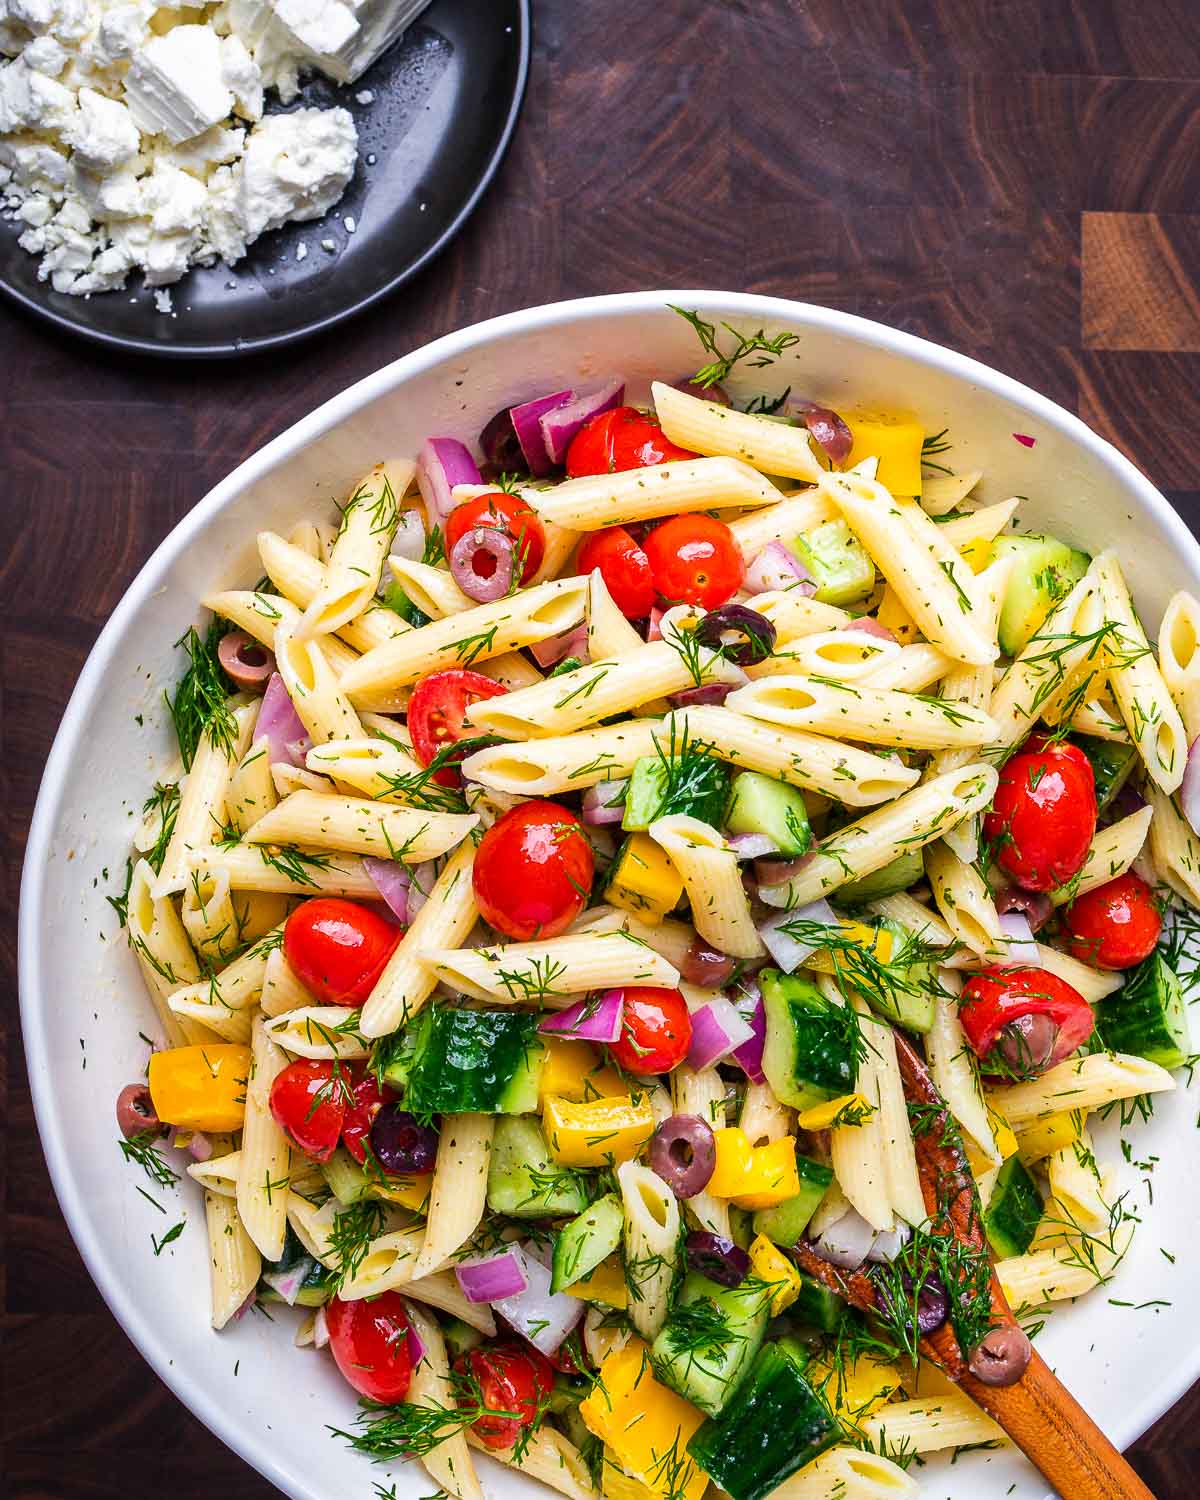 Greek pasta salad in large serving bowl with plate of feta cheese on the side.